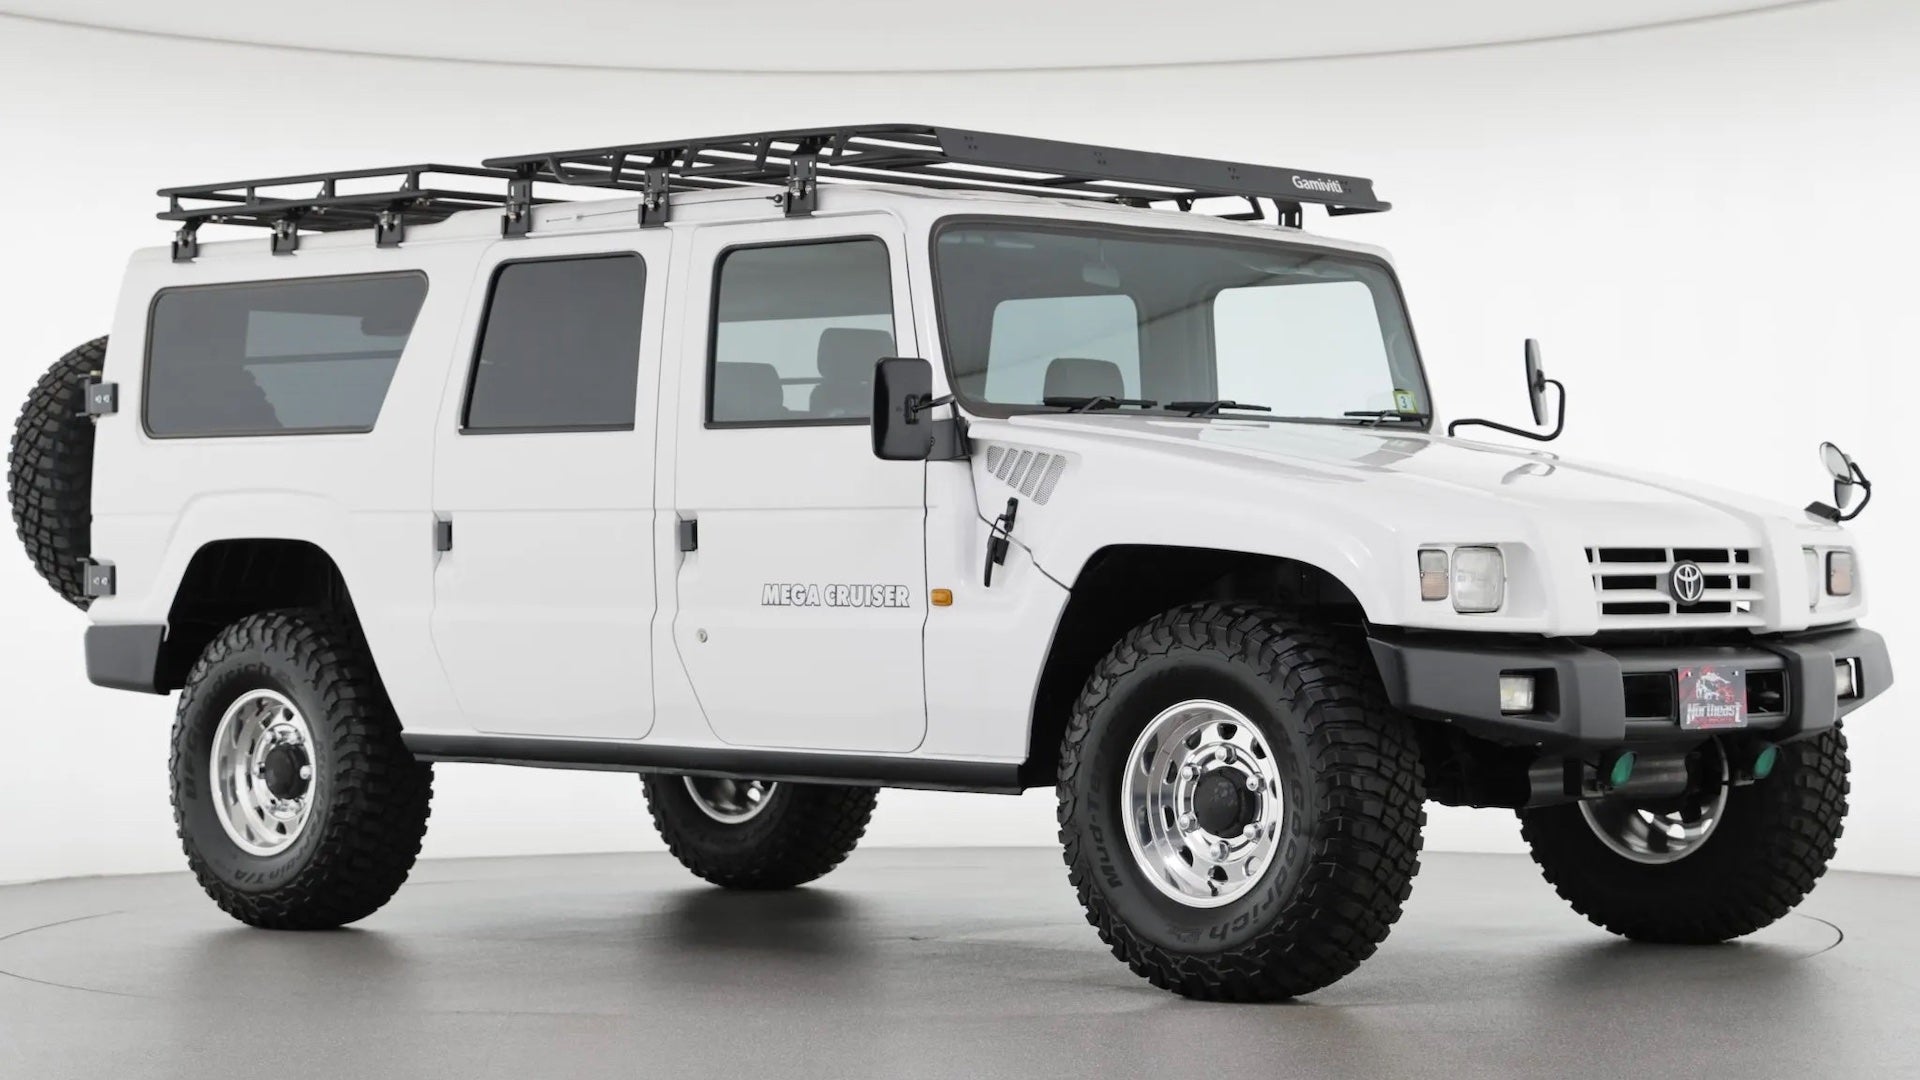 a rare toyota mega cruiser is for sale in the us right now